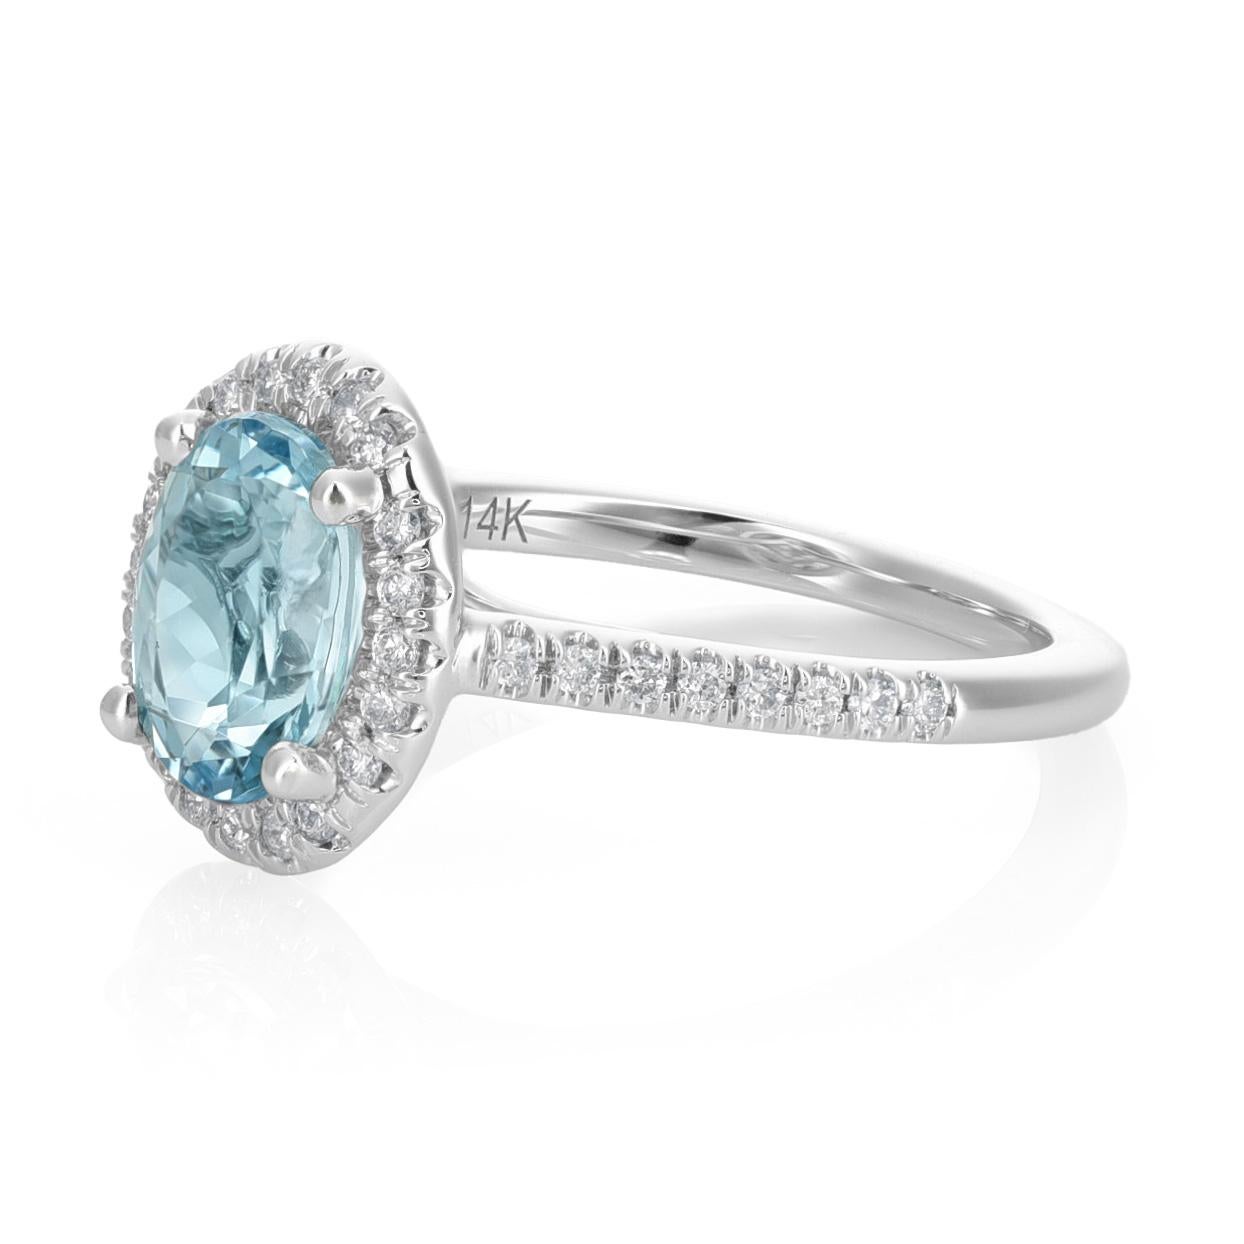 Discover timeless elegance with this 14K  White Gold ring featuring a 1.01-carat natural oval-cut aquamarine. The aquamarine's vibrant color is enhanced through a meticulous heating process, creating a captivating centerpiece. Accentuating the